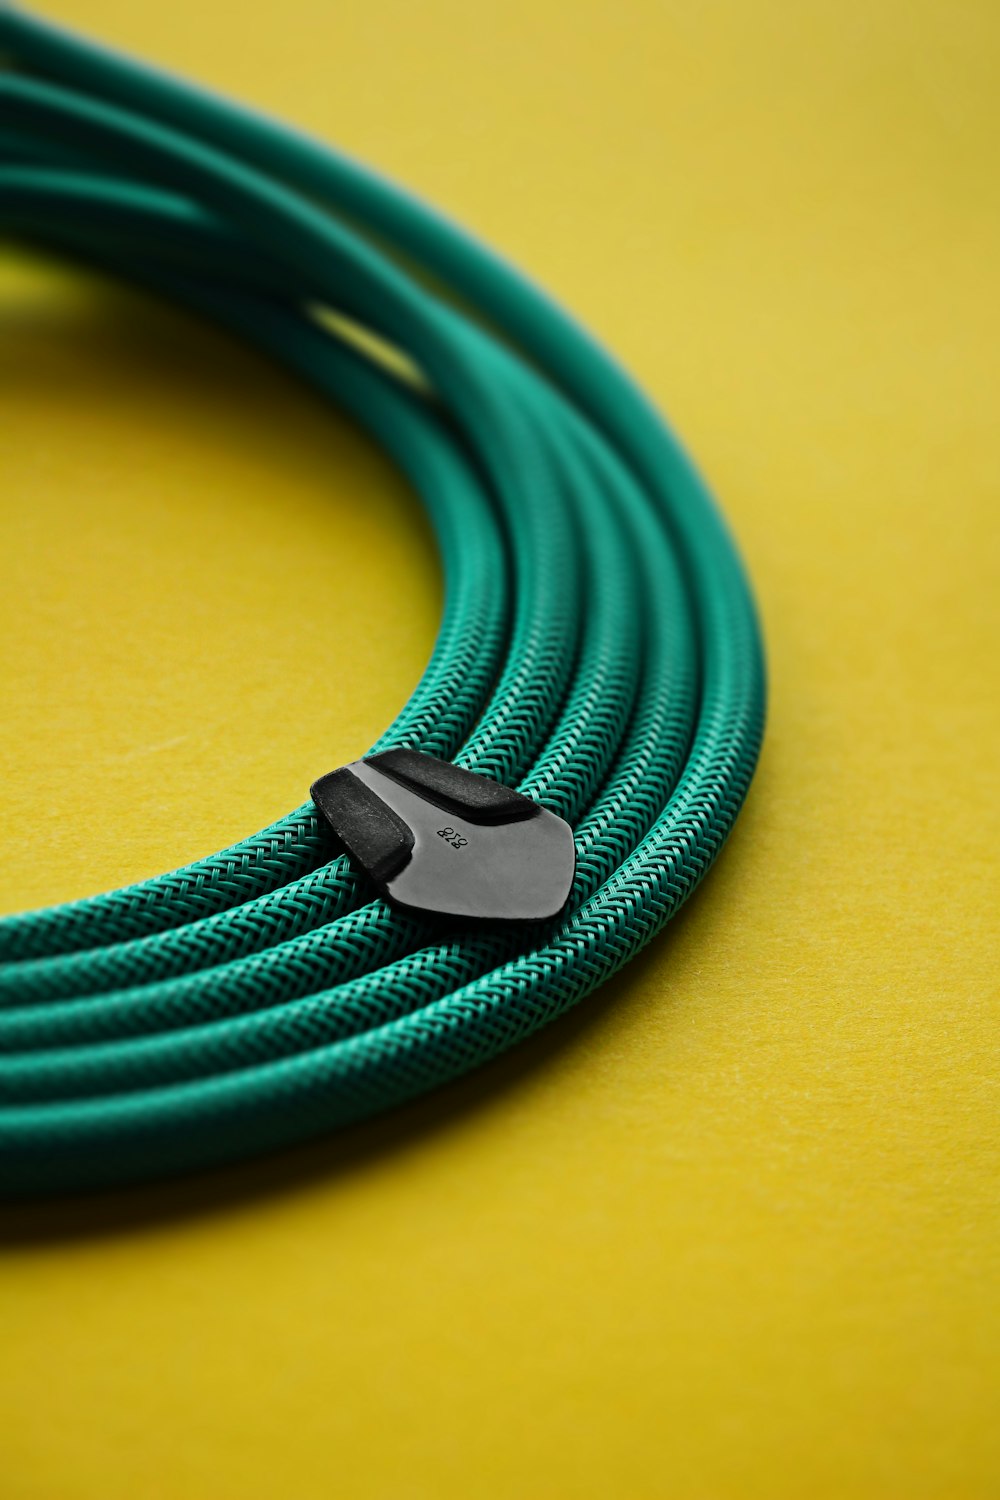 a close up of a green cable on a yellow surface